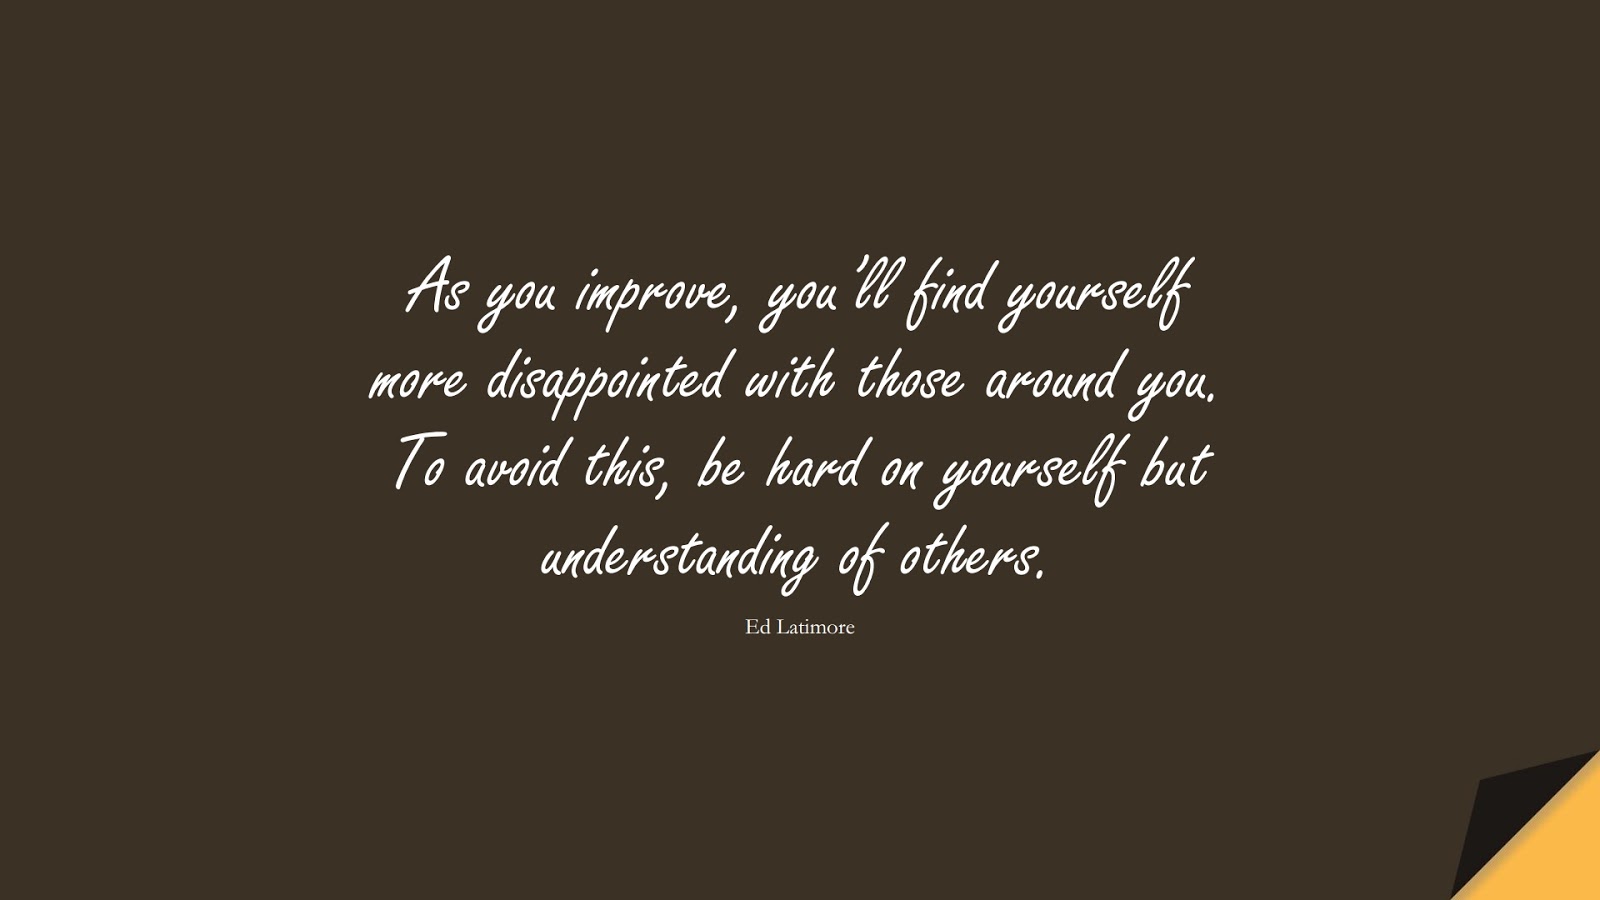 As you improve, you’ll find yourself more disappointed with those around you. To avoid this, be hard on yourself but understanding of others. (Ed Latimore);  #RelationshipQuotes